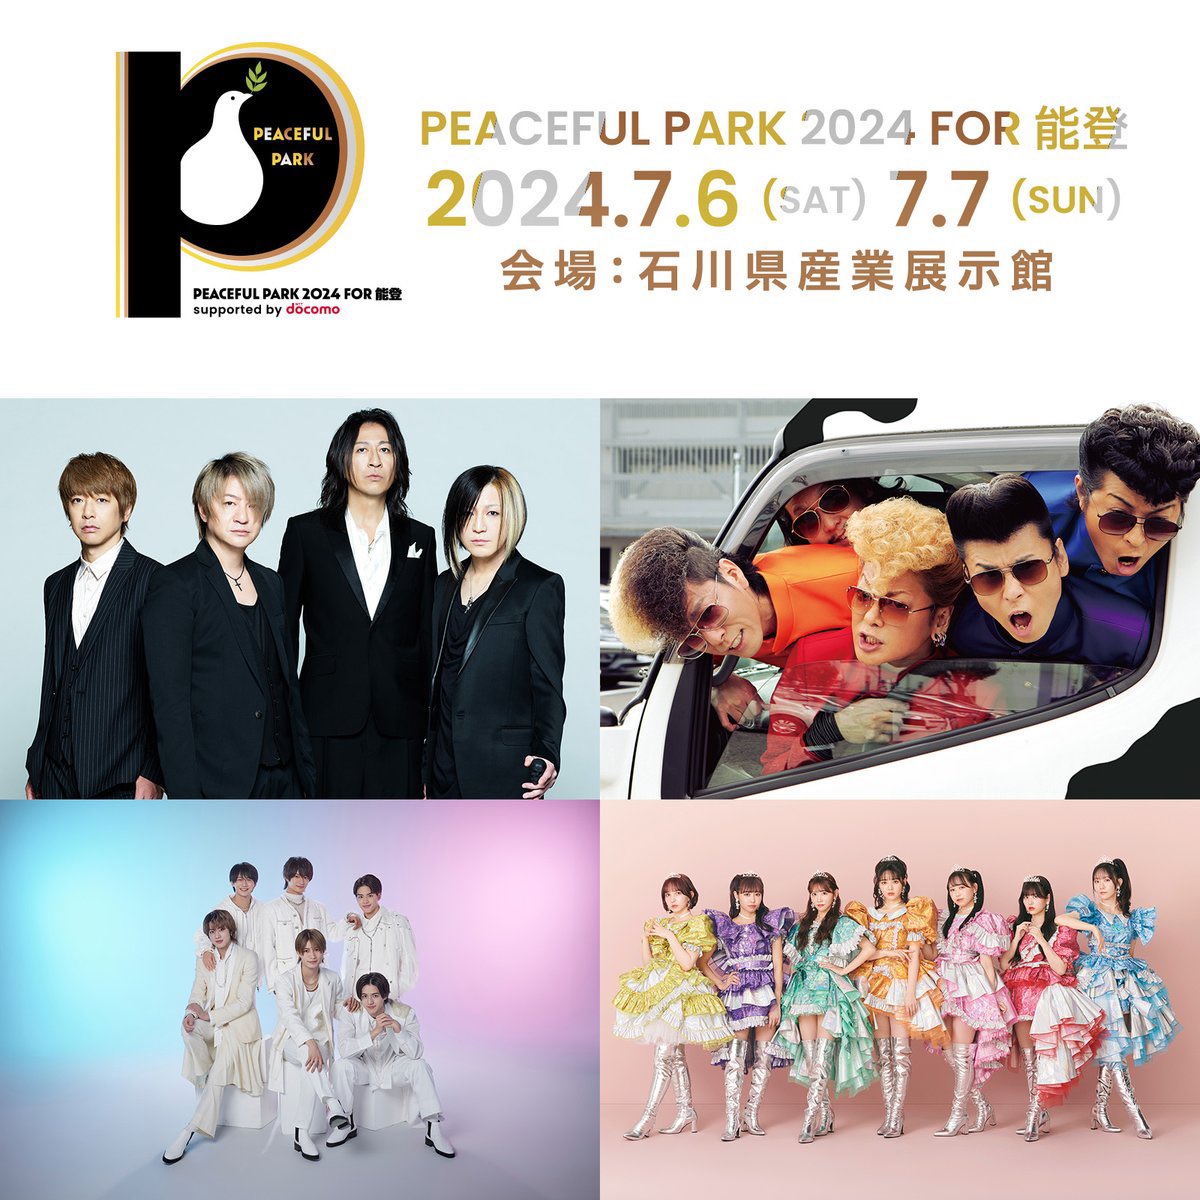 🌈PEACEFUL PARK 2024 for 能登-supported by docomo-🌈

7/7(日)16:00〜
📍⽯川県産業展⽰館

🎟️
peacefulpark.jp

#FRUITSZIPPER #フルーツジッパー
#ふるっぱー #PEACEFULPARK